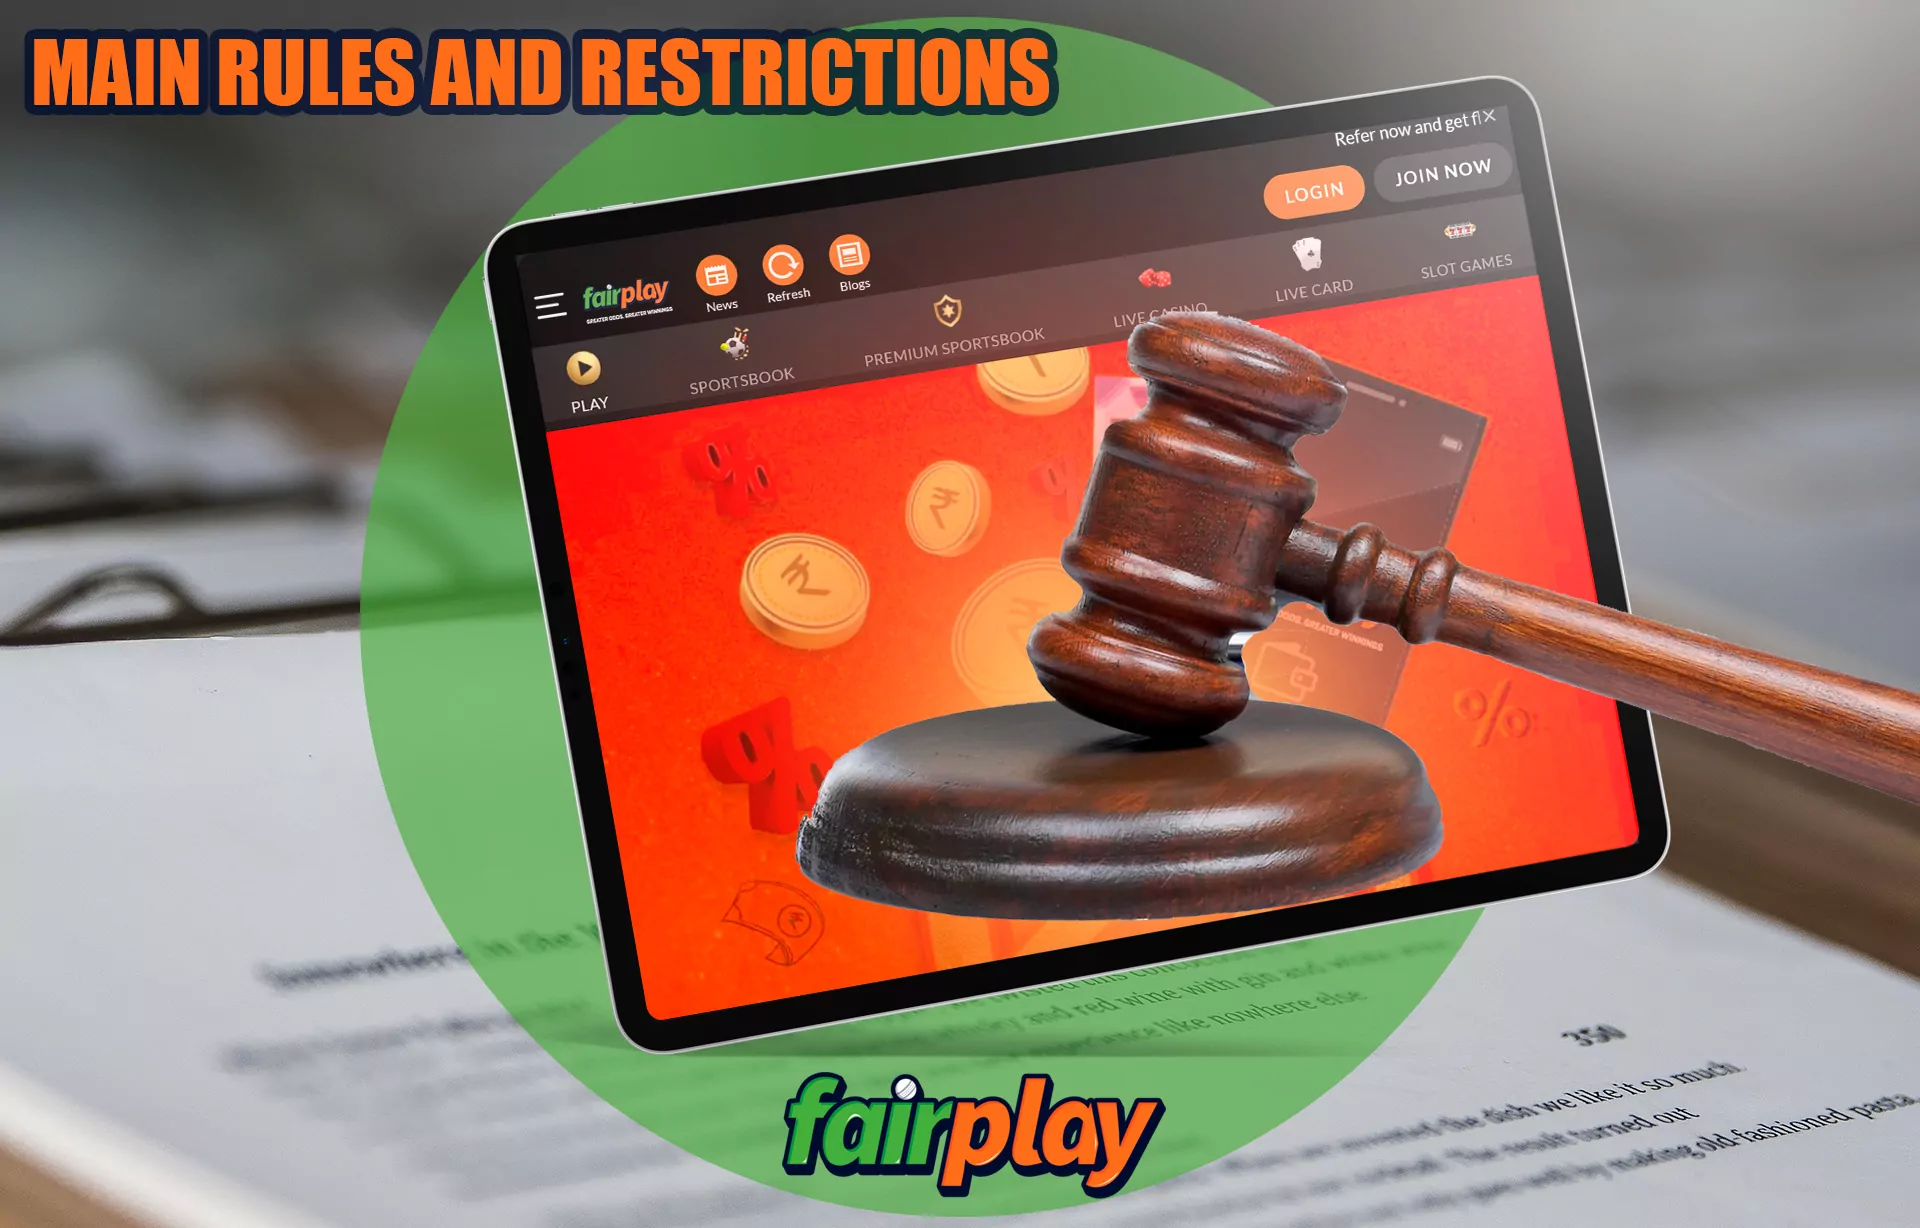 Together with the internal security system, Fairplay cooperates with law enforcement agencies in the investigation of violations, strictly complies with local laws.